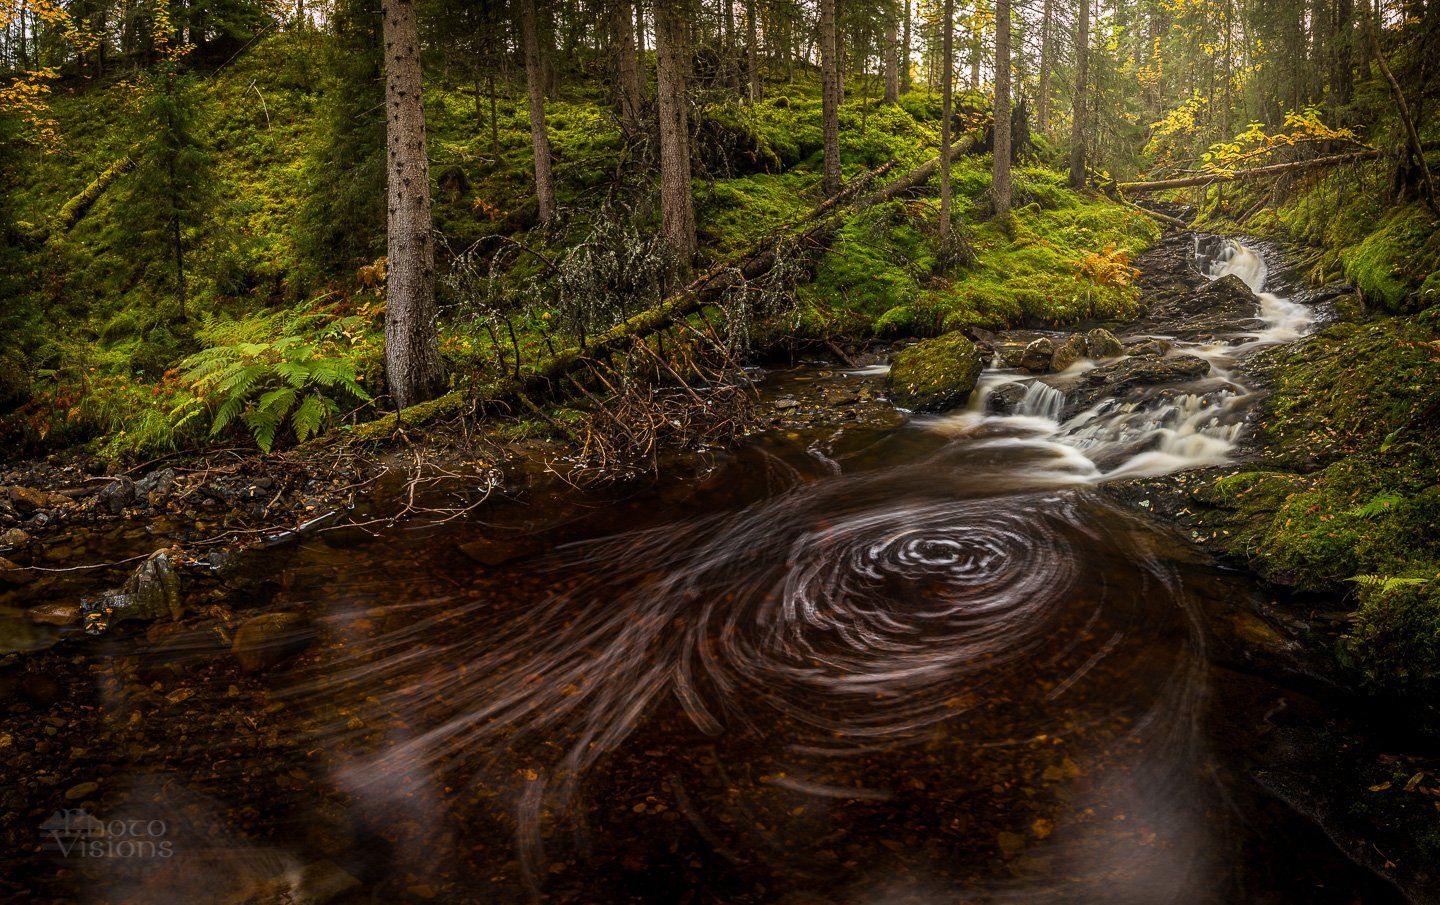 forest,nature,natural,creek,river,water,flowing,forest,woods,woodland,norway,norwegian,boreal,, Adrian Szatewicz